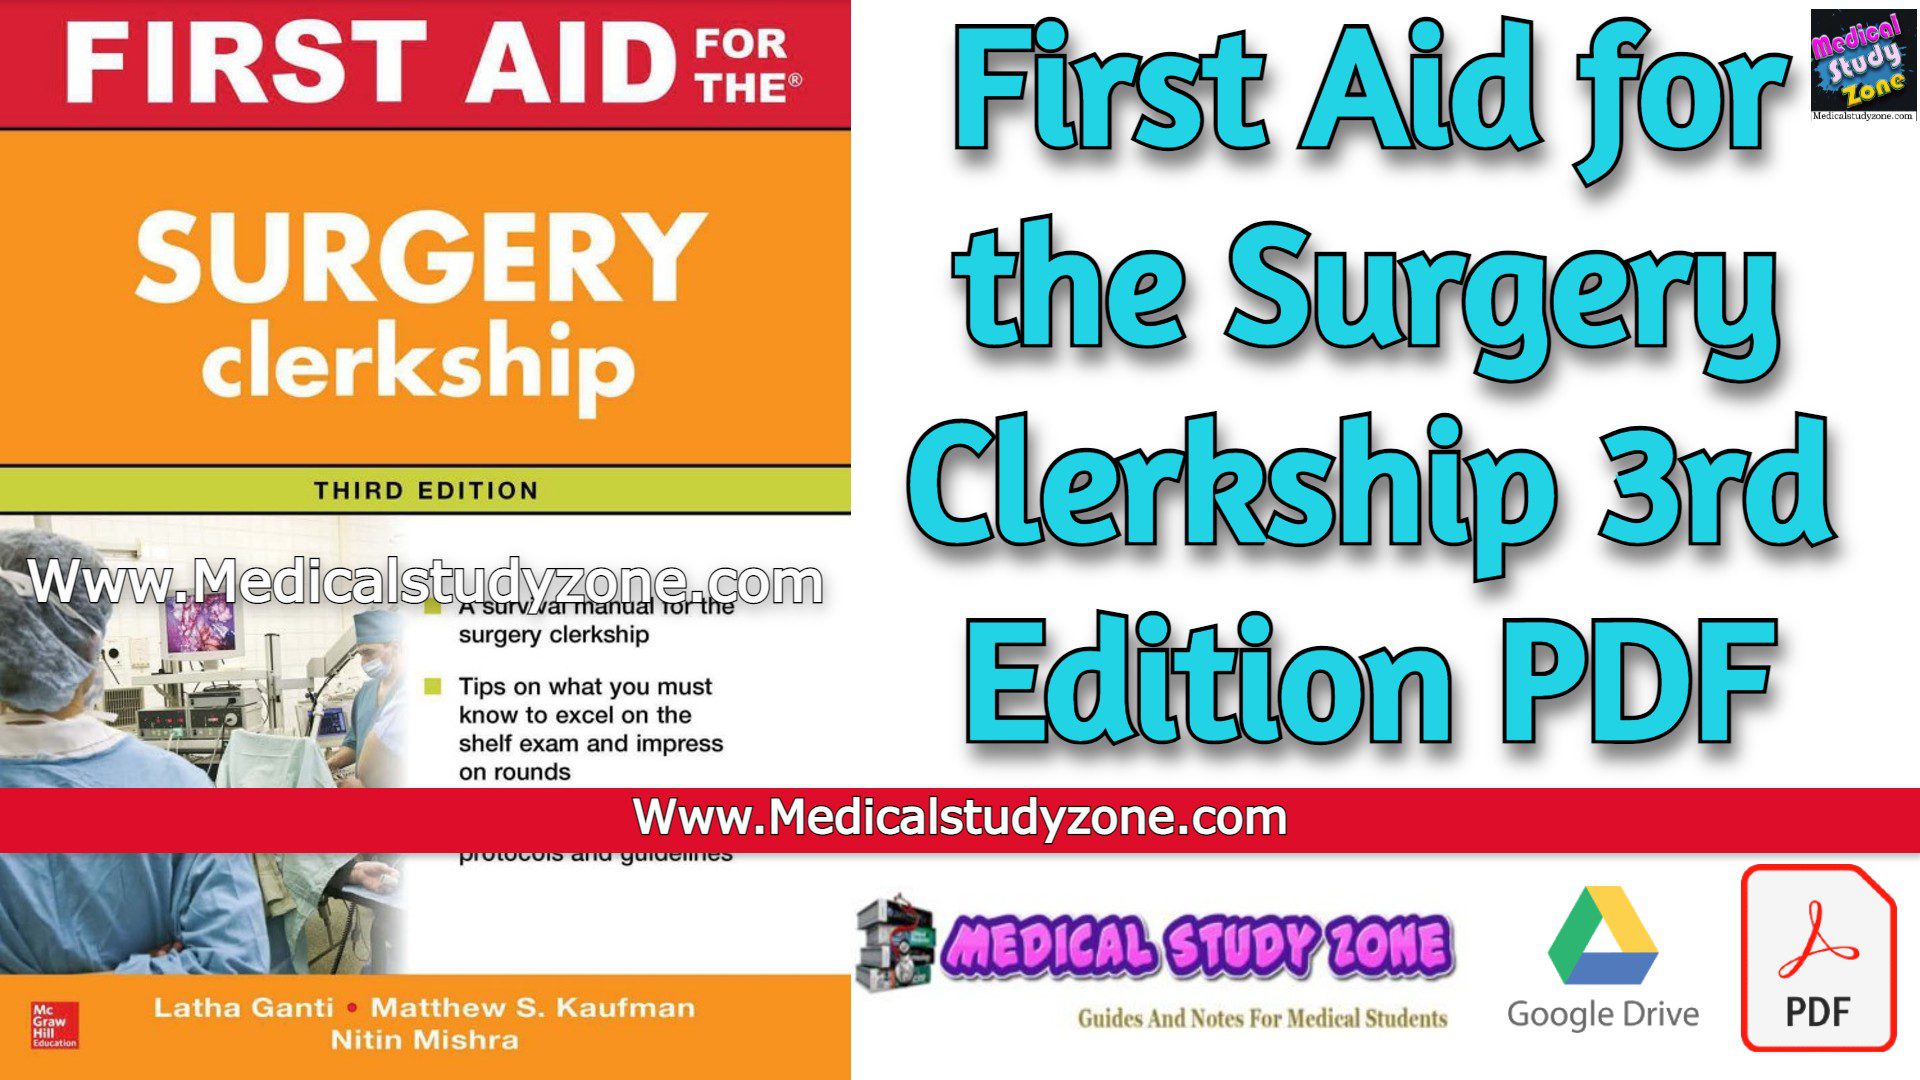 First Aid for the Surgery Clerkship 3rd Edition PDF Free Download [Direct Link]